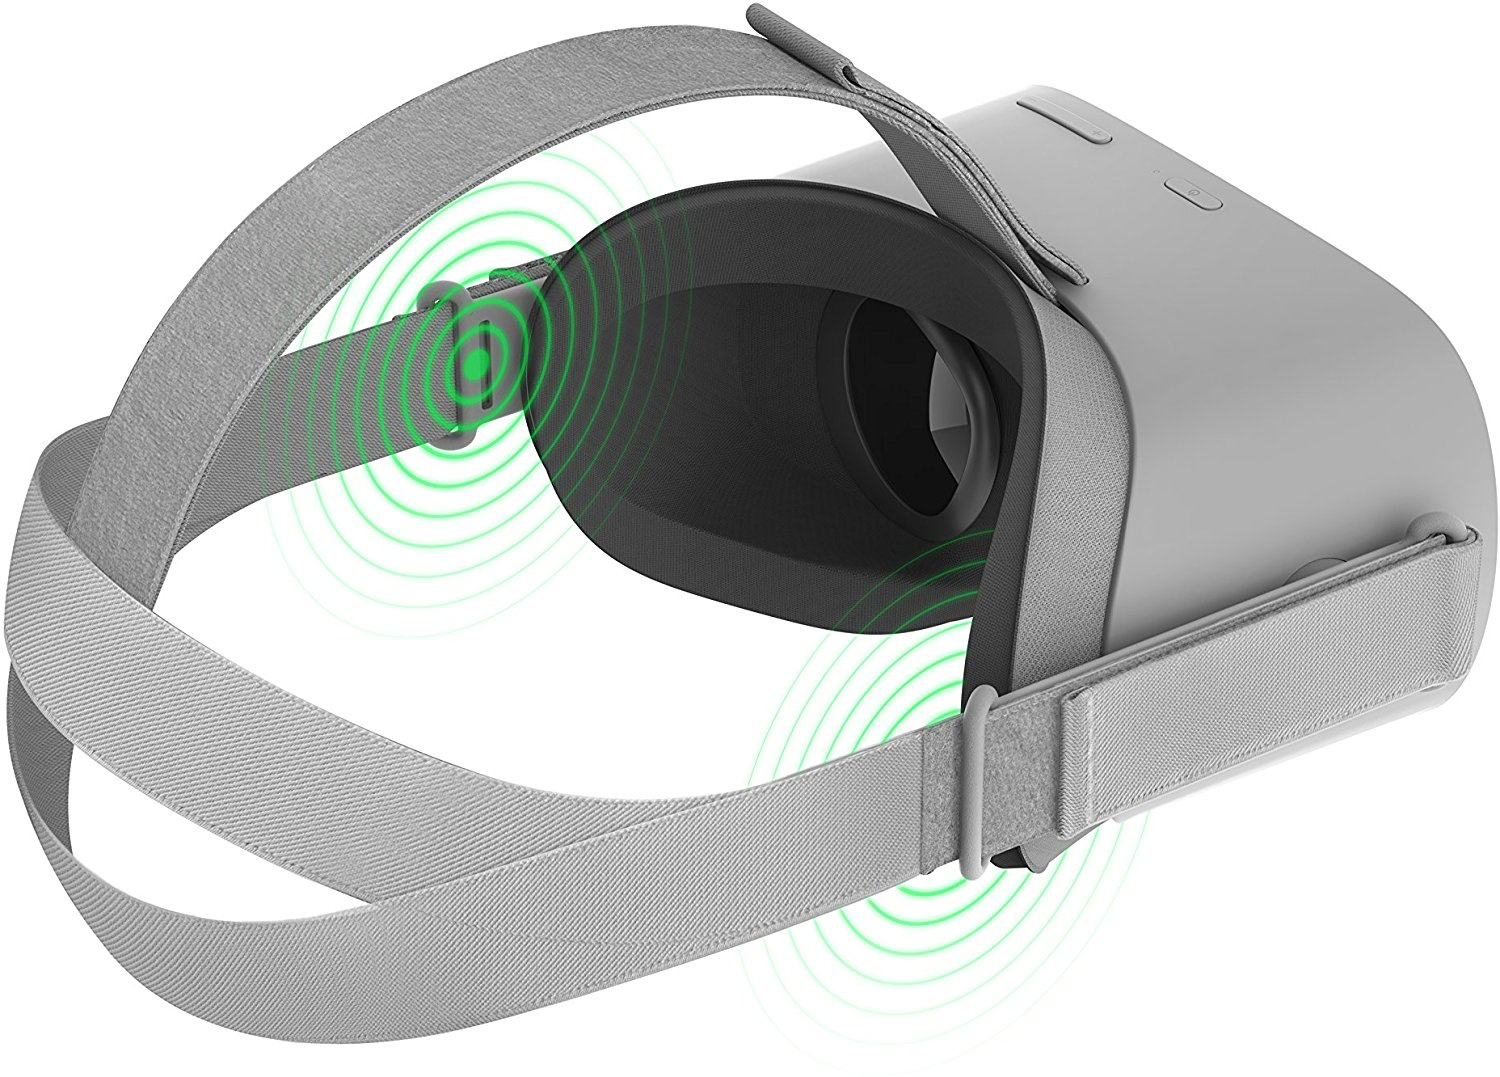 Oculus Go Now Available: Mainstream Standalone VR Headset Starts at $199